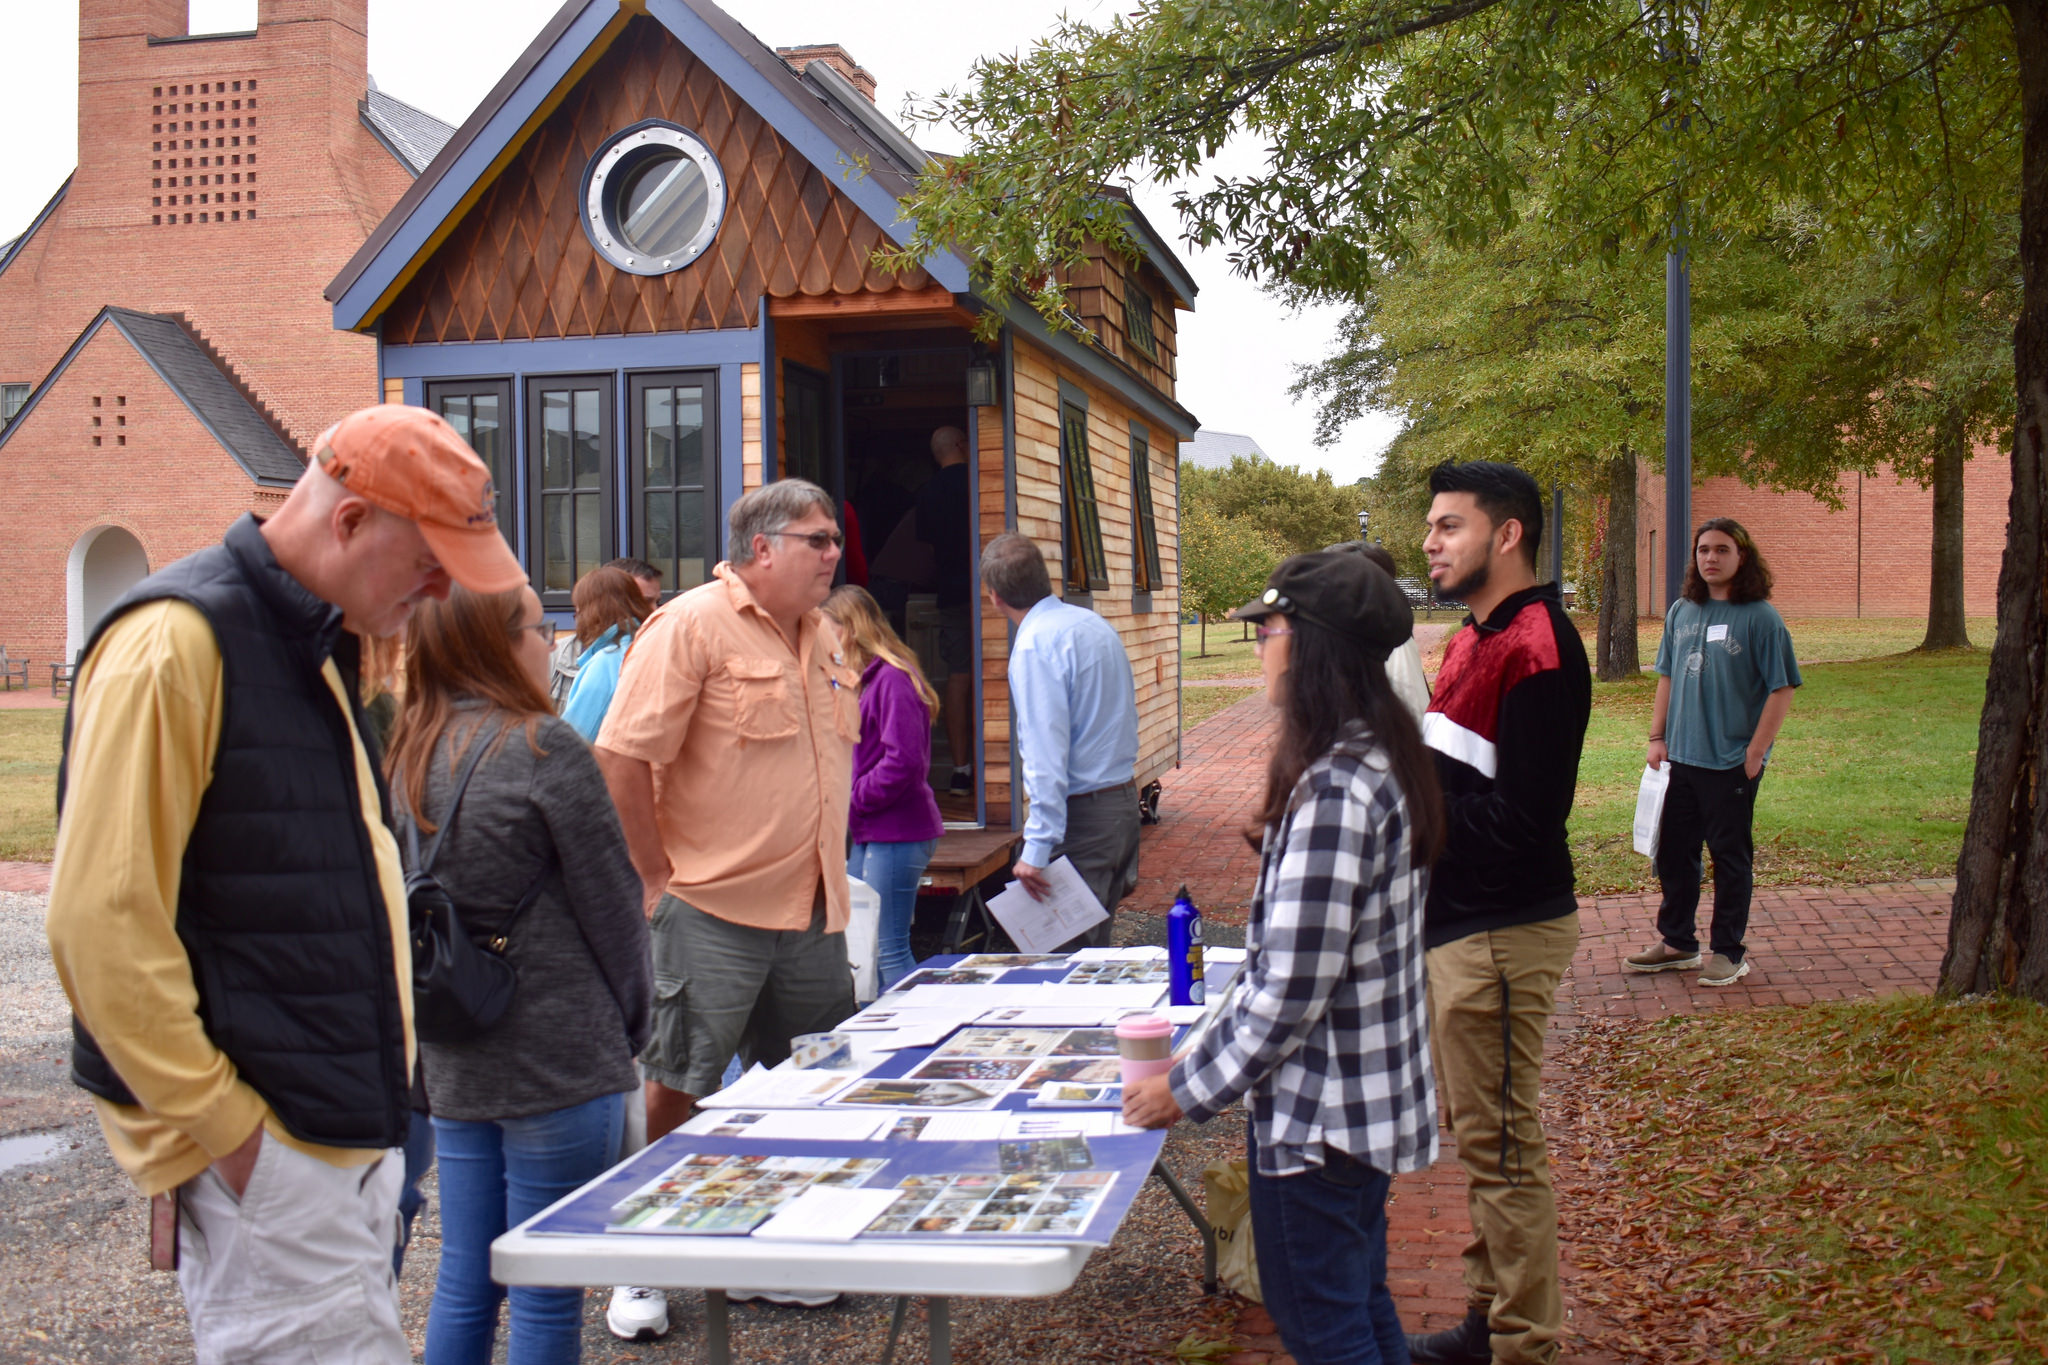 Students welcoming prospective students and parents at the Tiny House displace